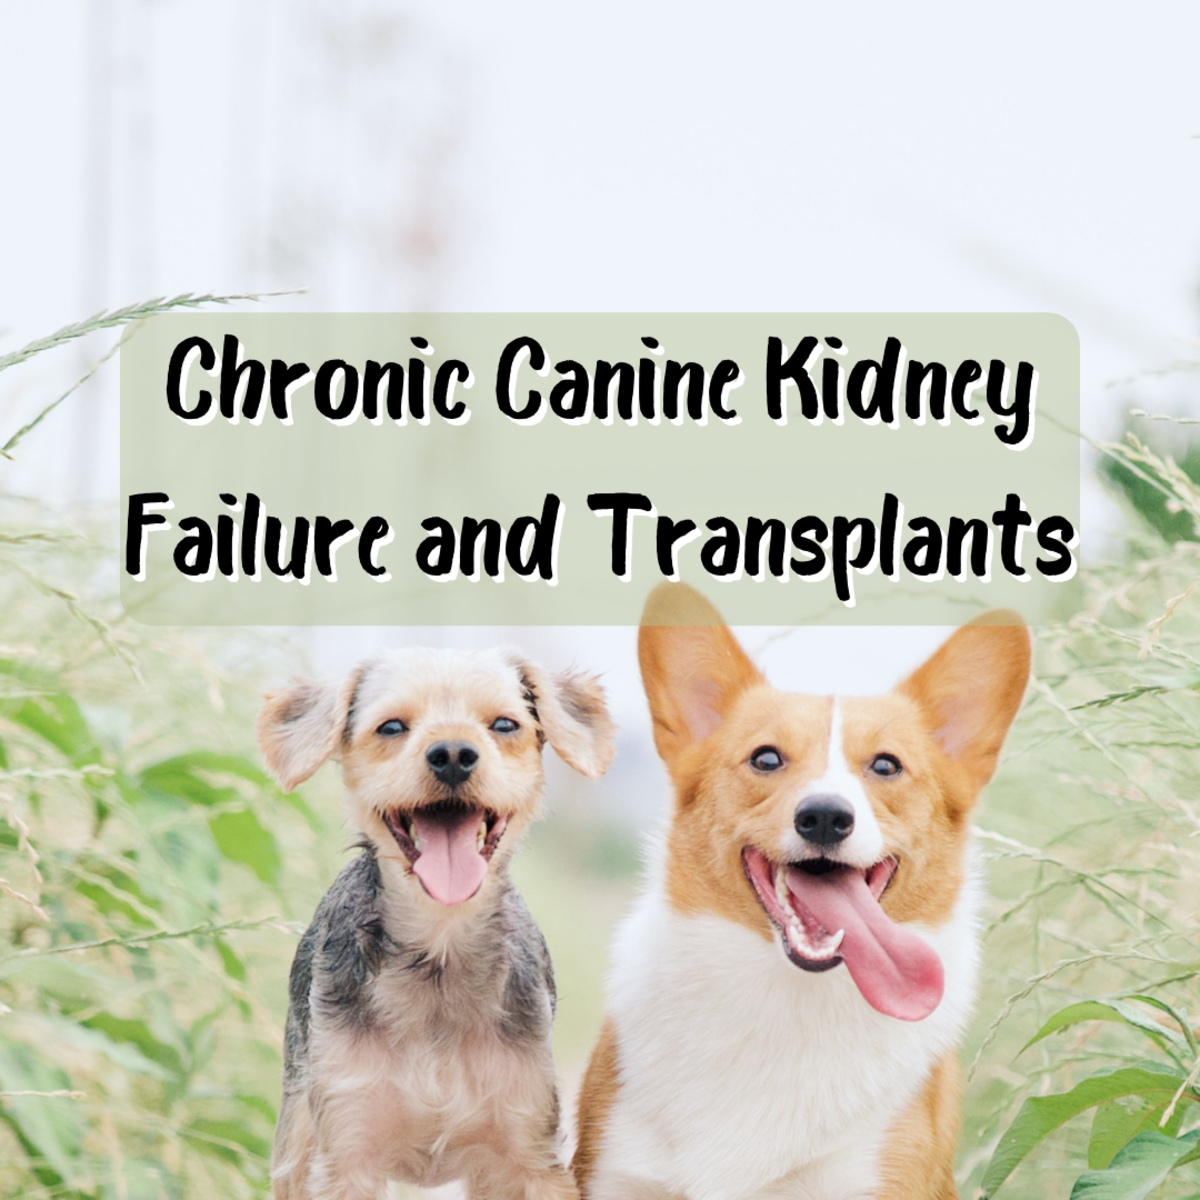 If my dog develops chronic kidney failure, will he need a transplant? Read on to learn the answer, as well as further info on what causes kidney disease in dogs. Retired vet Cathy Alinovi illuminates dog owners' many questions in this interview.